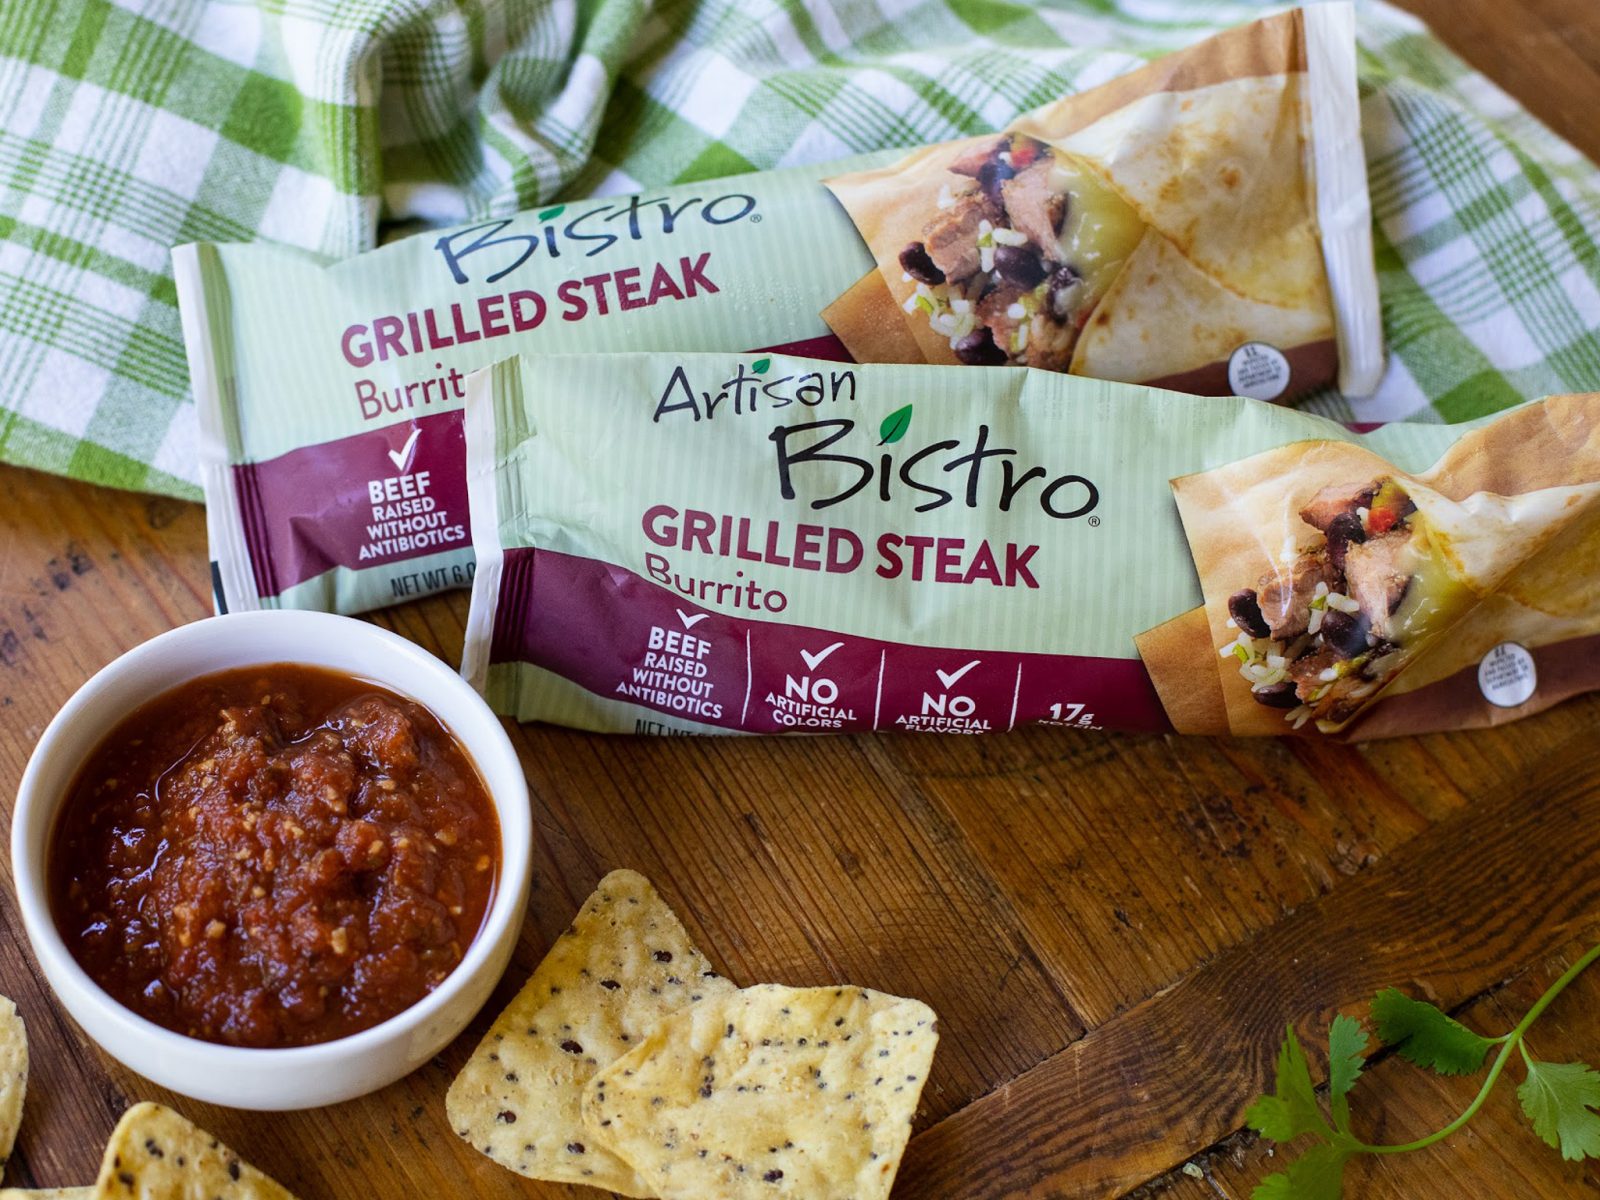 Grab An Artisan Bistro Burrito For As Low As $1.67 At Publix